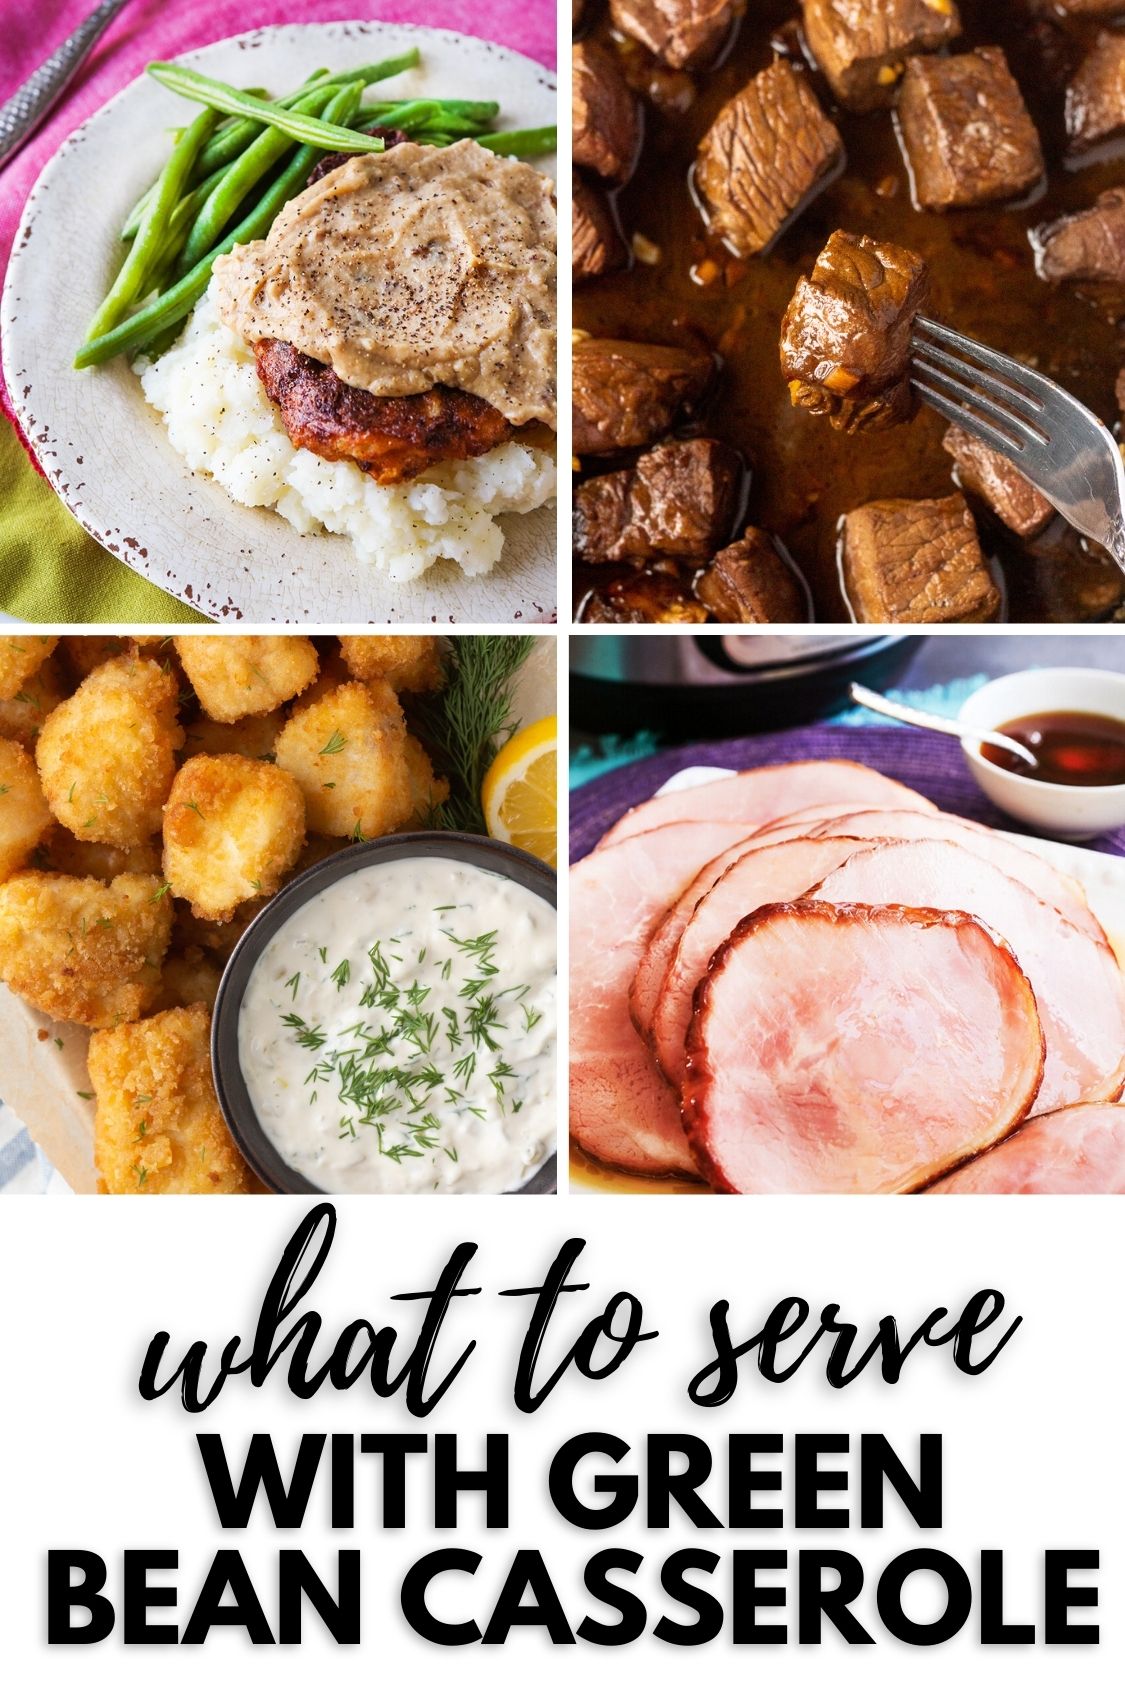 Pinterest image showing a collage of 4 meals with a text overlay of what to serve with green bean casserole. 